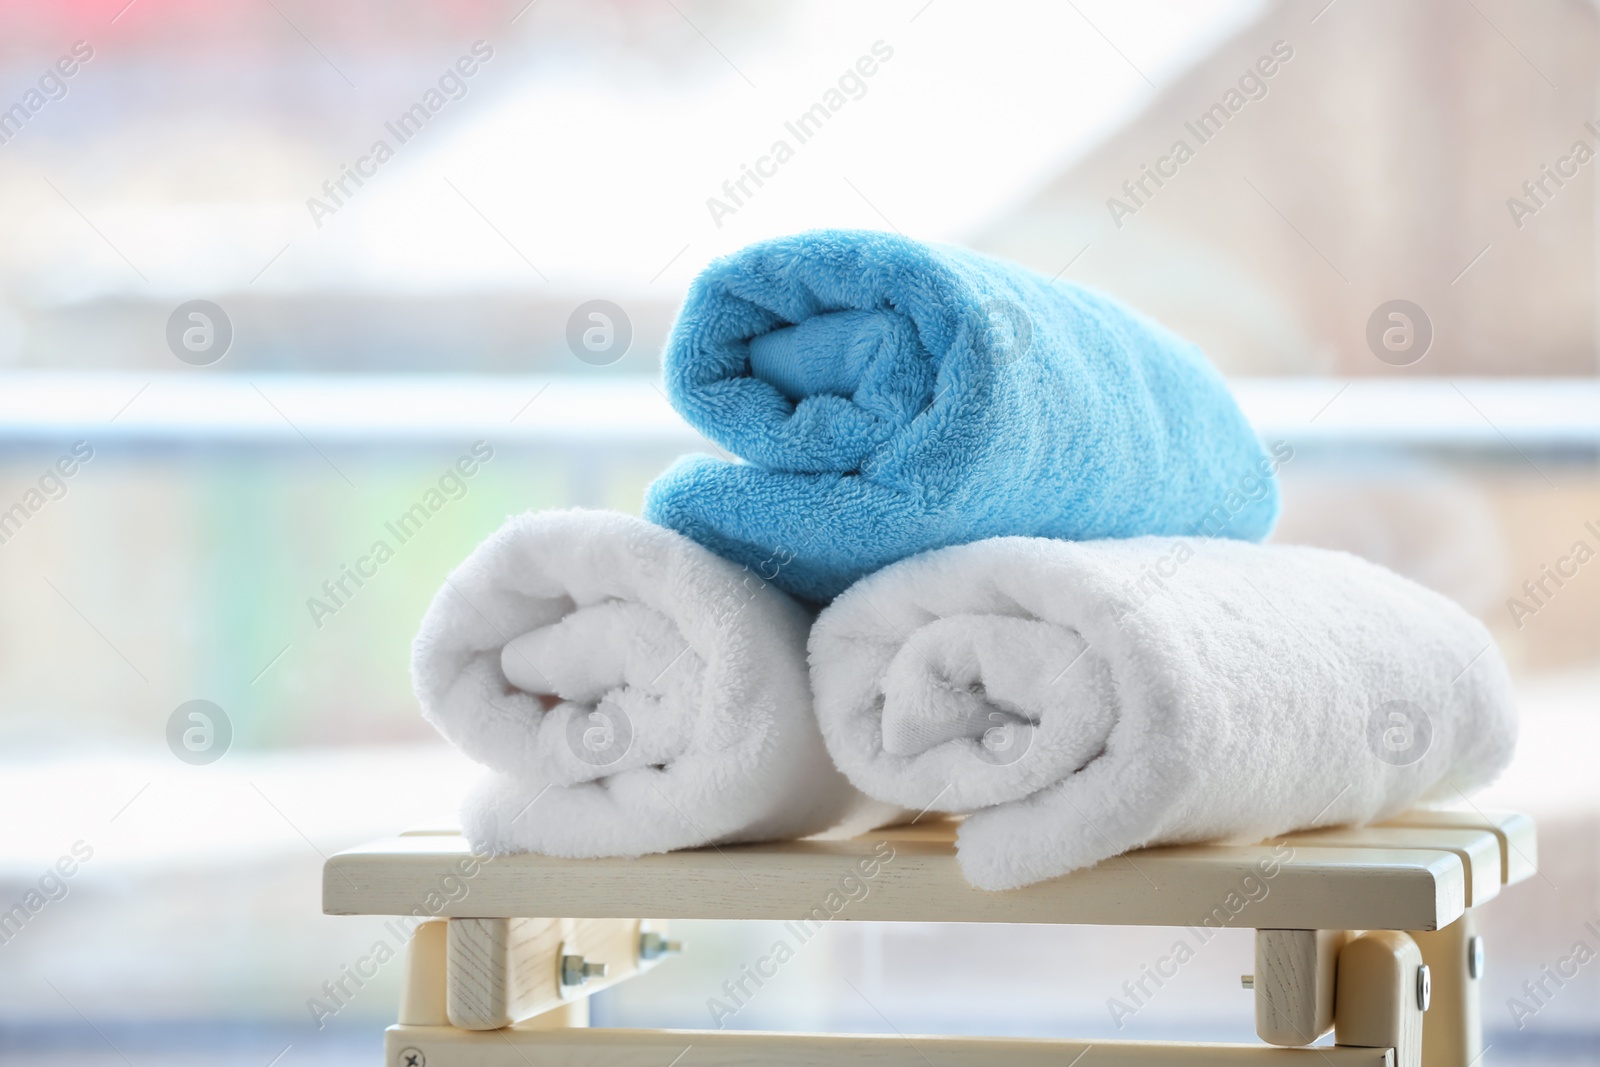 Photo of Rolled towels on table against blurred background